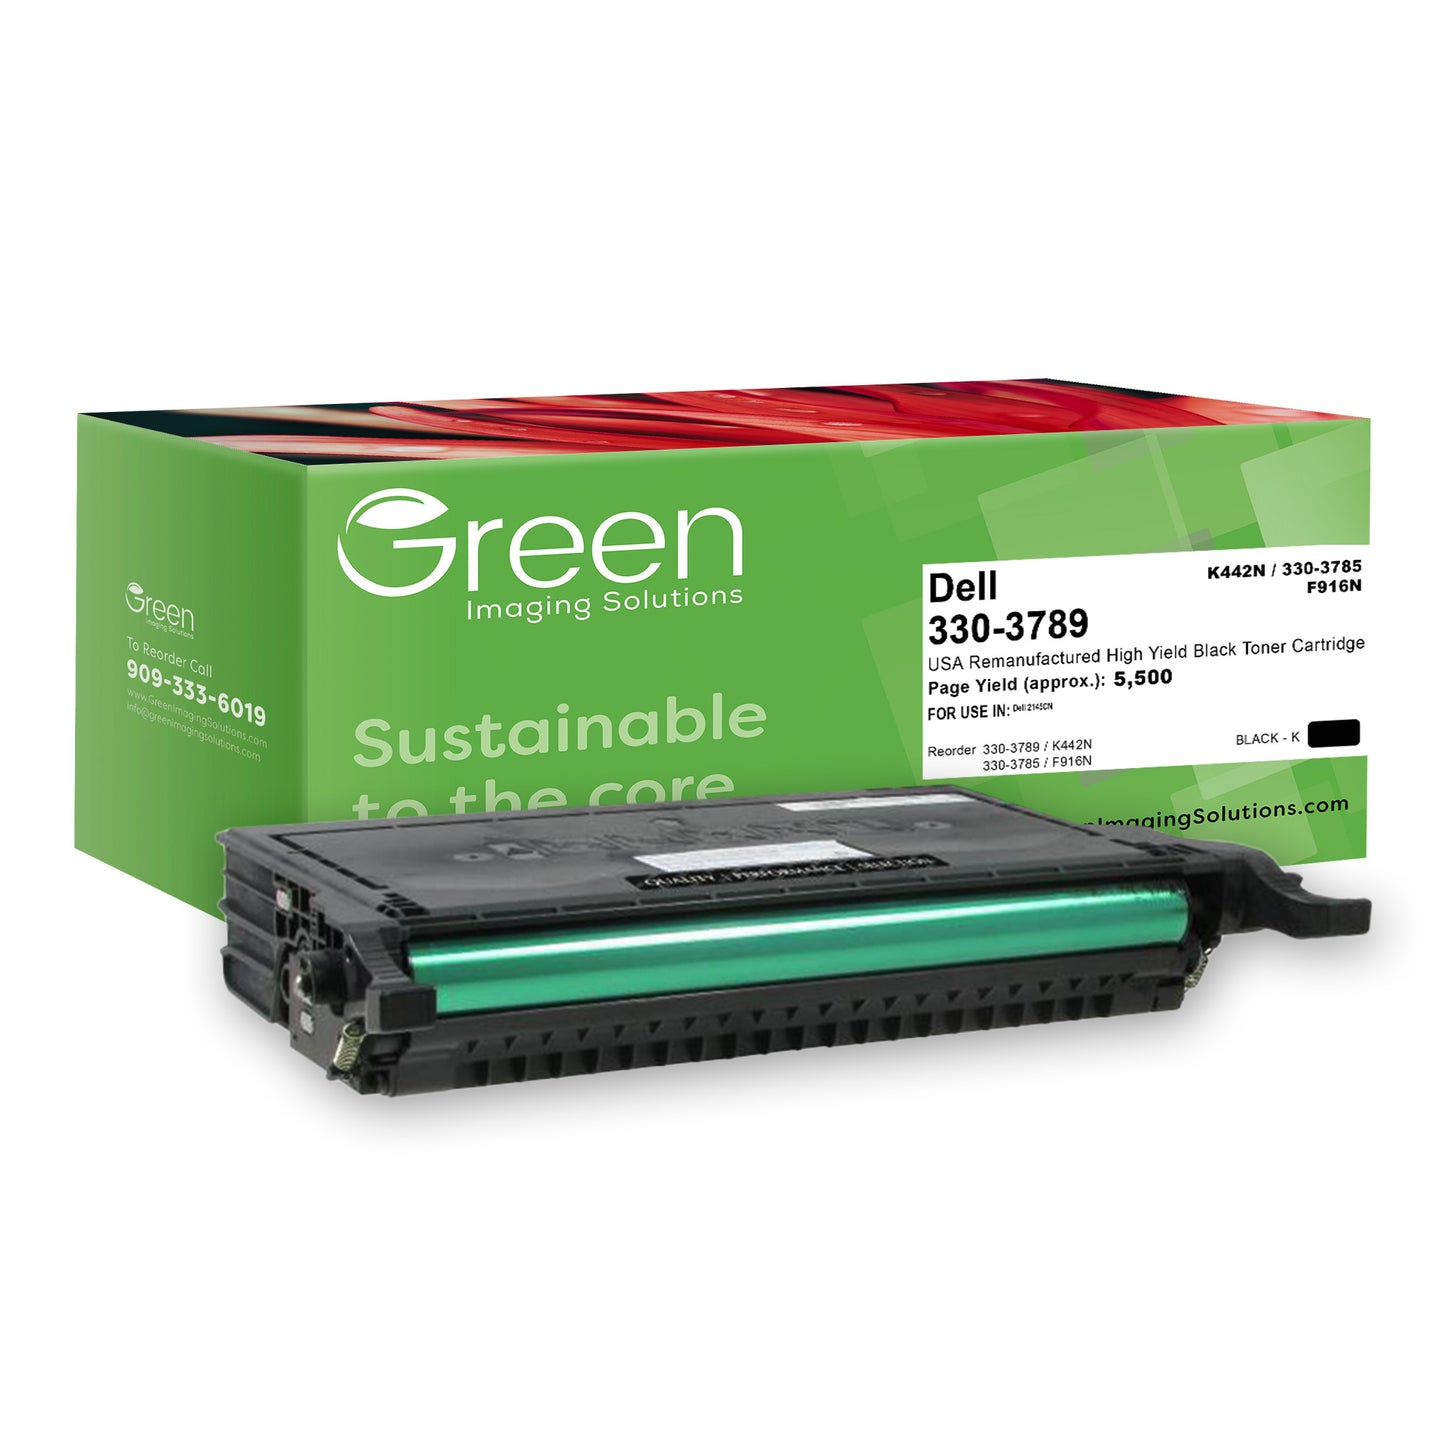 Green Imaging Solutions USA Remanufactured High Yield Black Toner Cartridge for Dell 2145